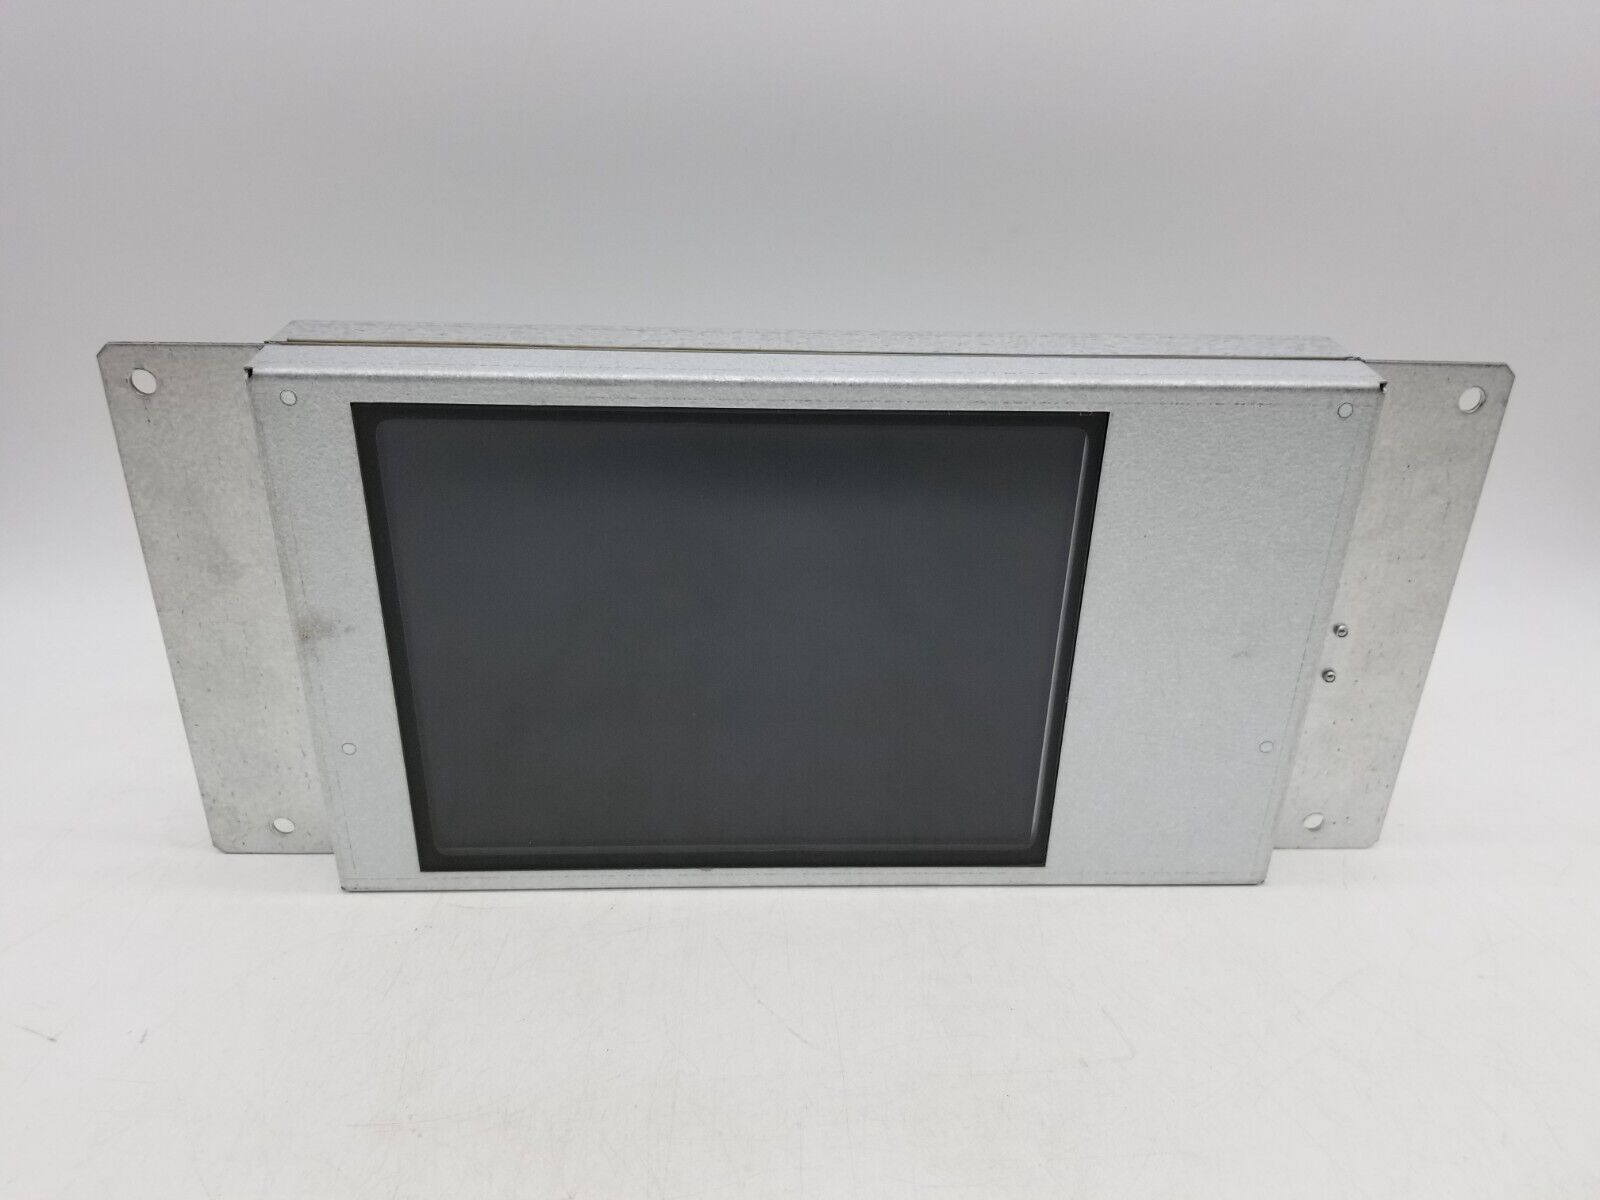 Siemens 7741072 Graphical Display for Siemens CT Scanner Parts